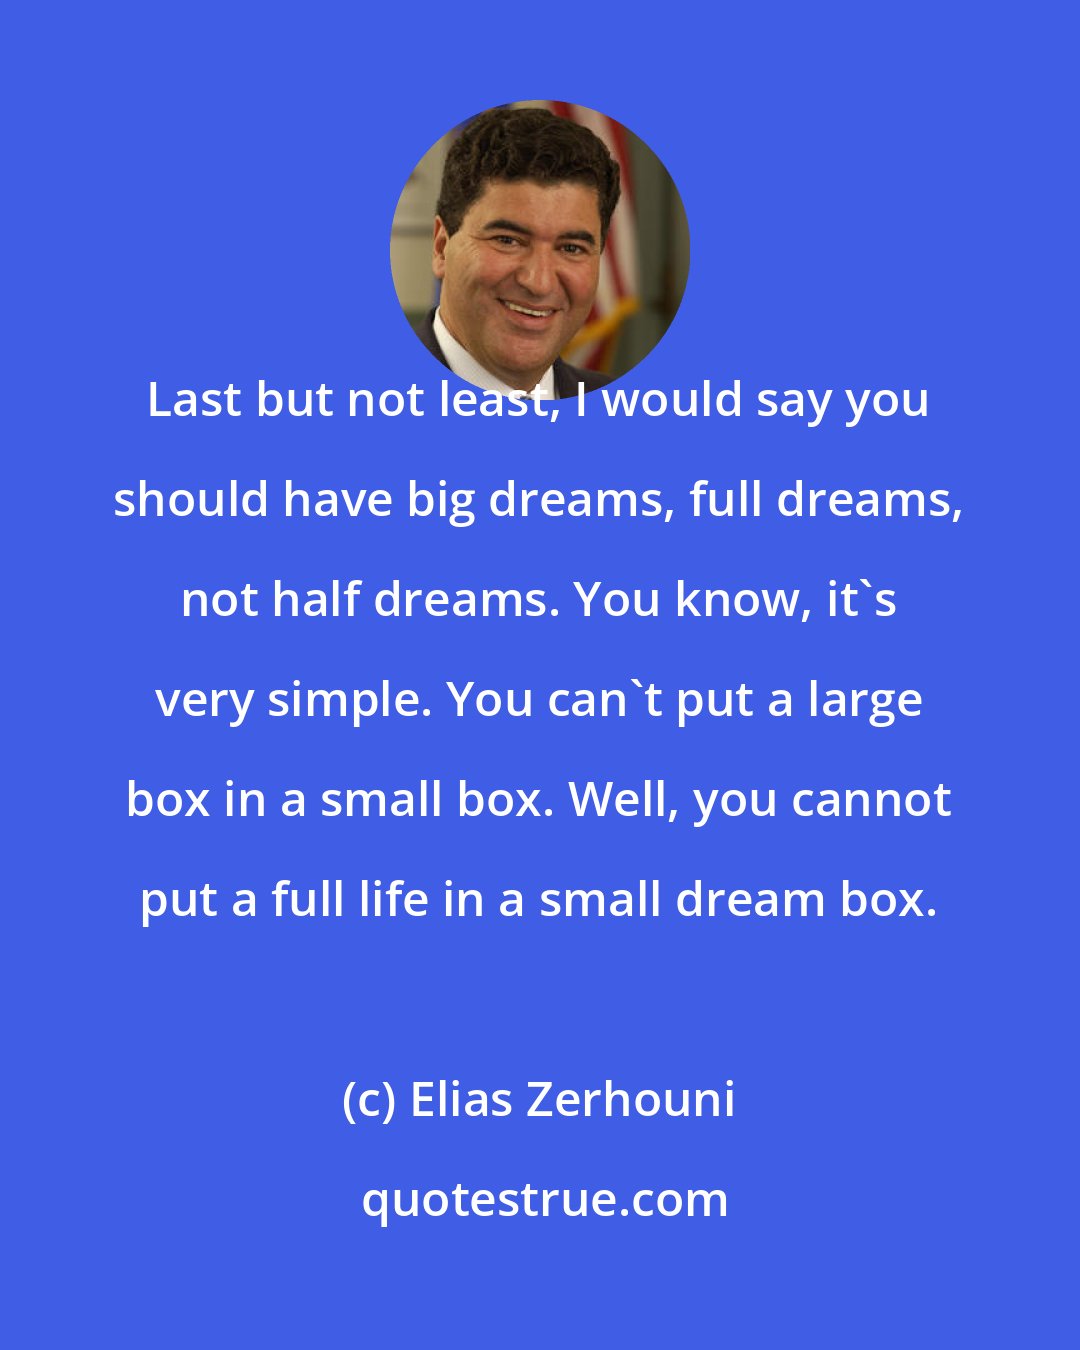 Elias Zerhouni: Last but not least, I would say you should have big dreams, full dreams, not half dreams. You know, it's very simple. You can't put a large box in a small box. Well, you cannot put a full life in a small dream box.